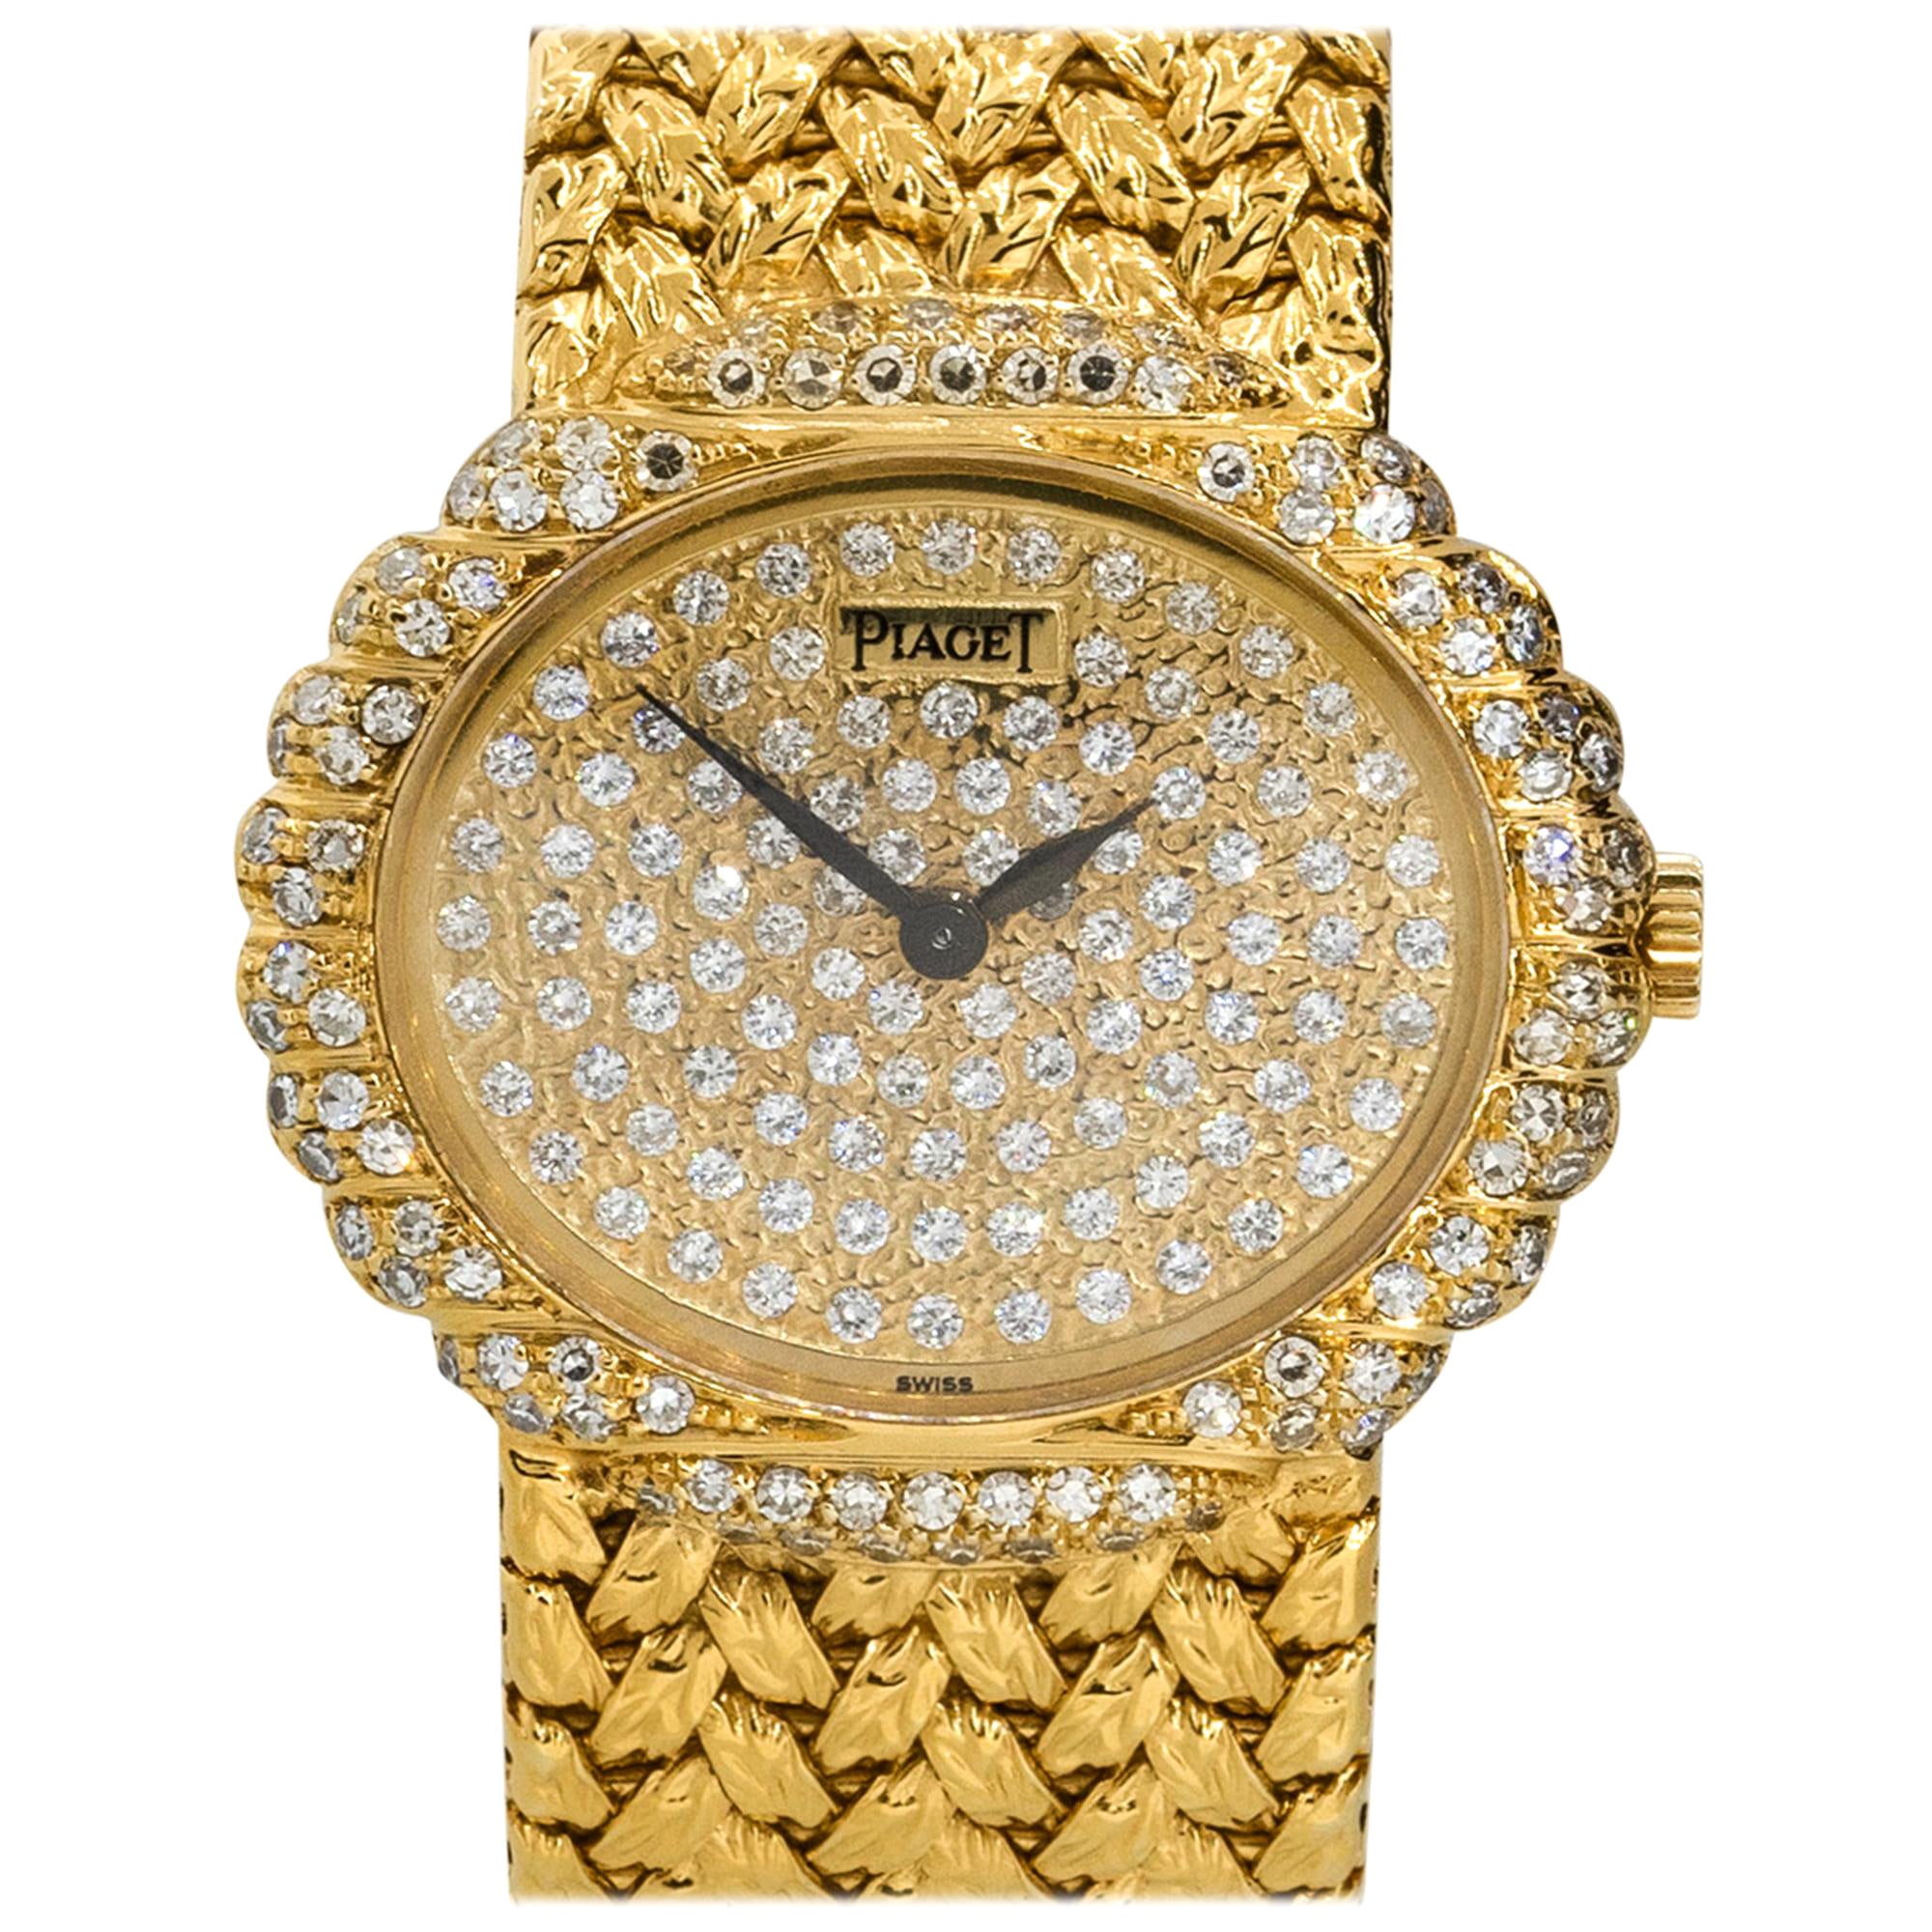 How much does it cost to put diamonds in a watch?